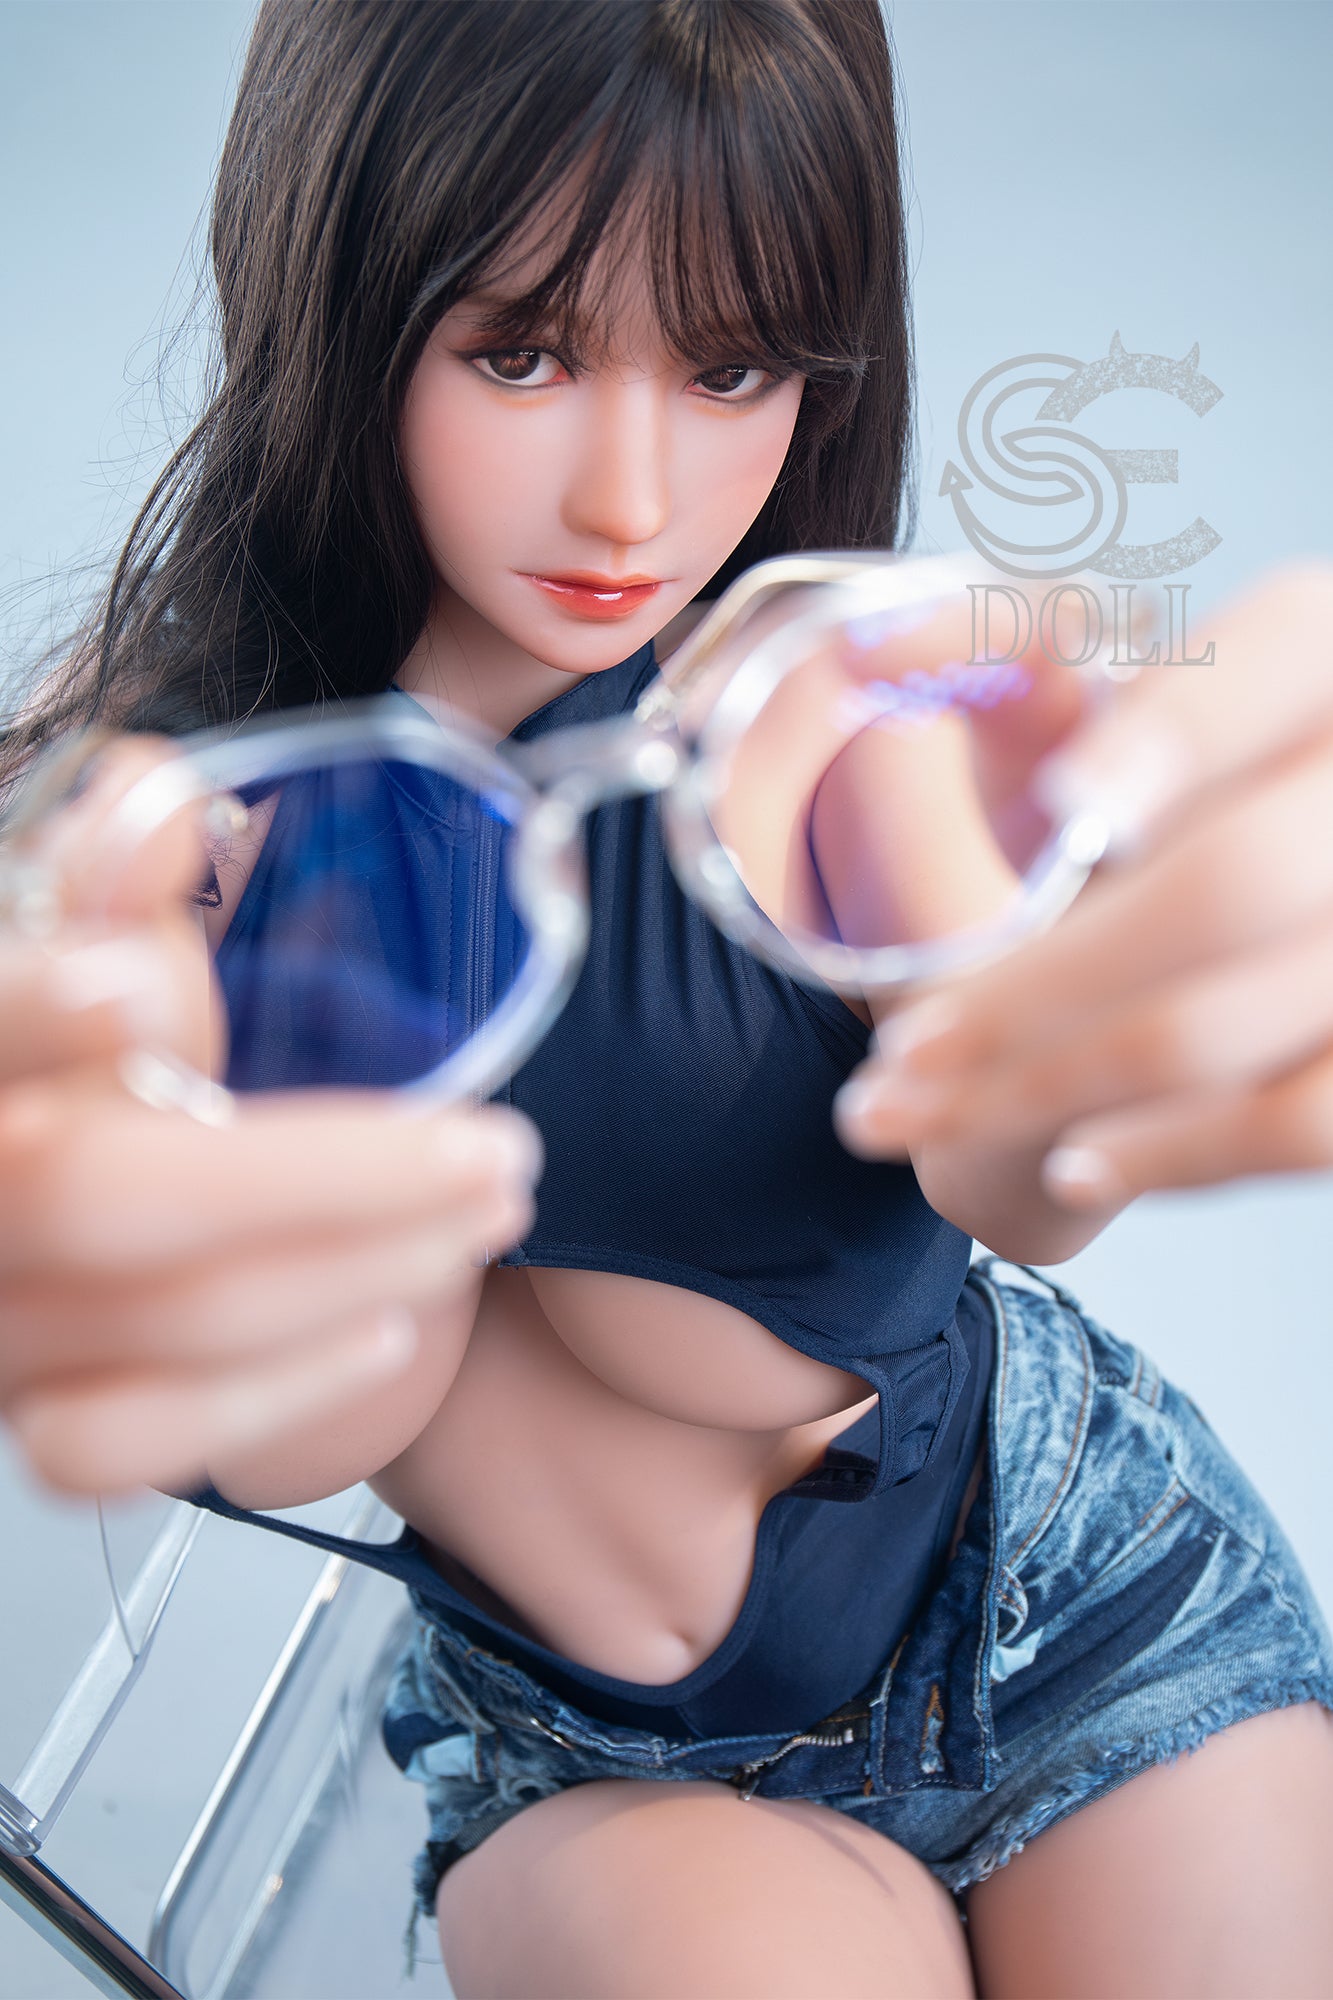 SEDOLL 157 cm H TPE - Phoebe | Buy Sex Dolls at DOLLS ACTUALLY